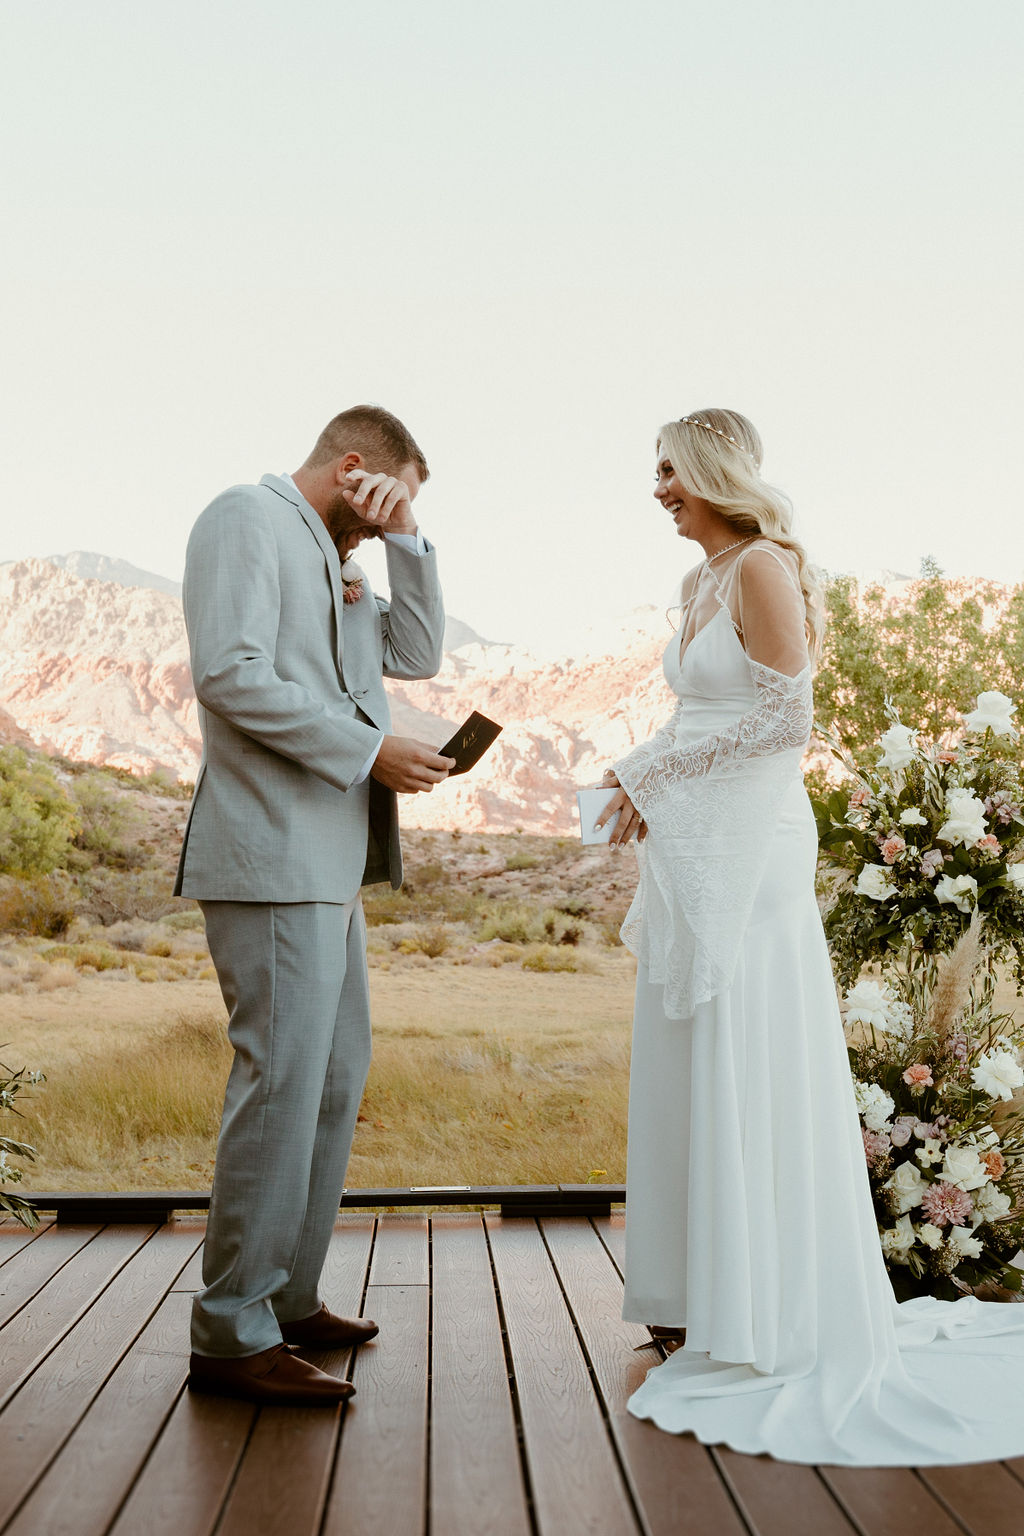 Red Rock Desert & Neon Vegas Lights. The groom reading his personal vows and tearing up 